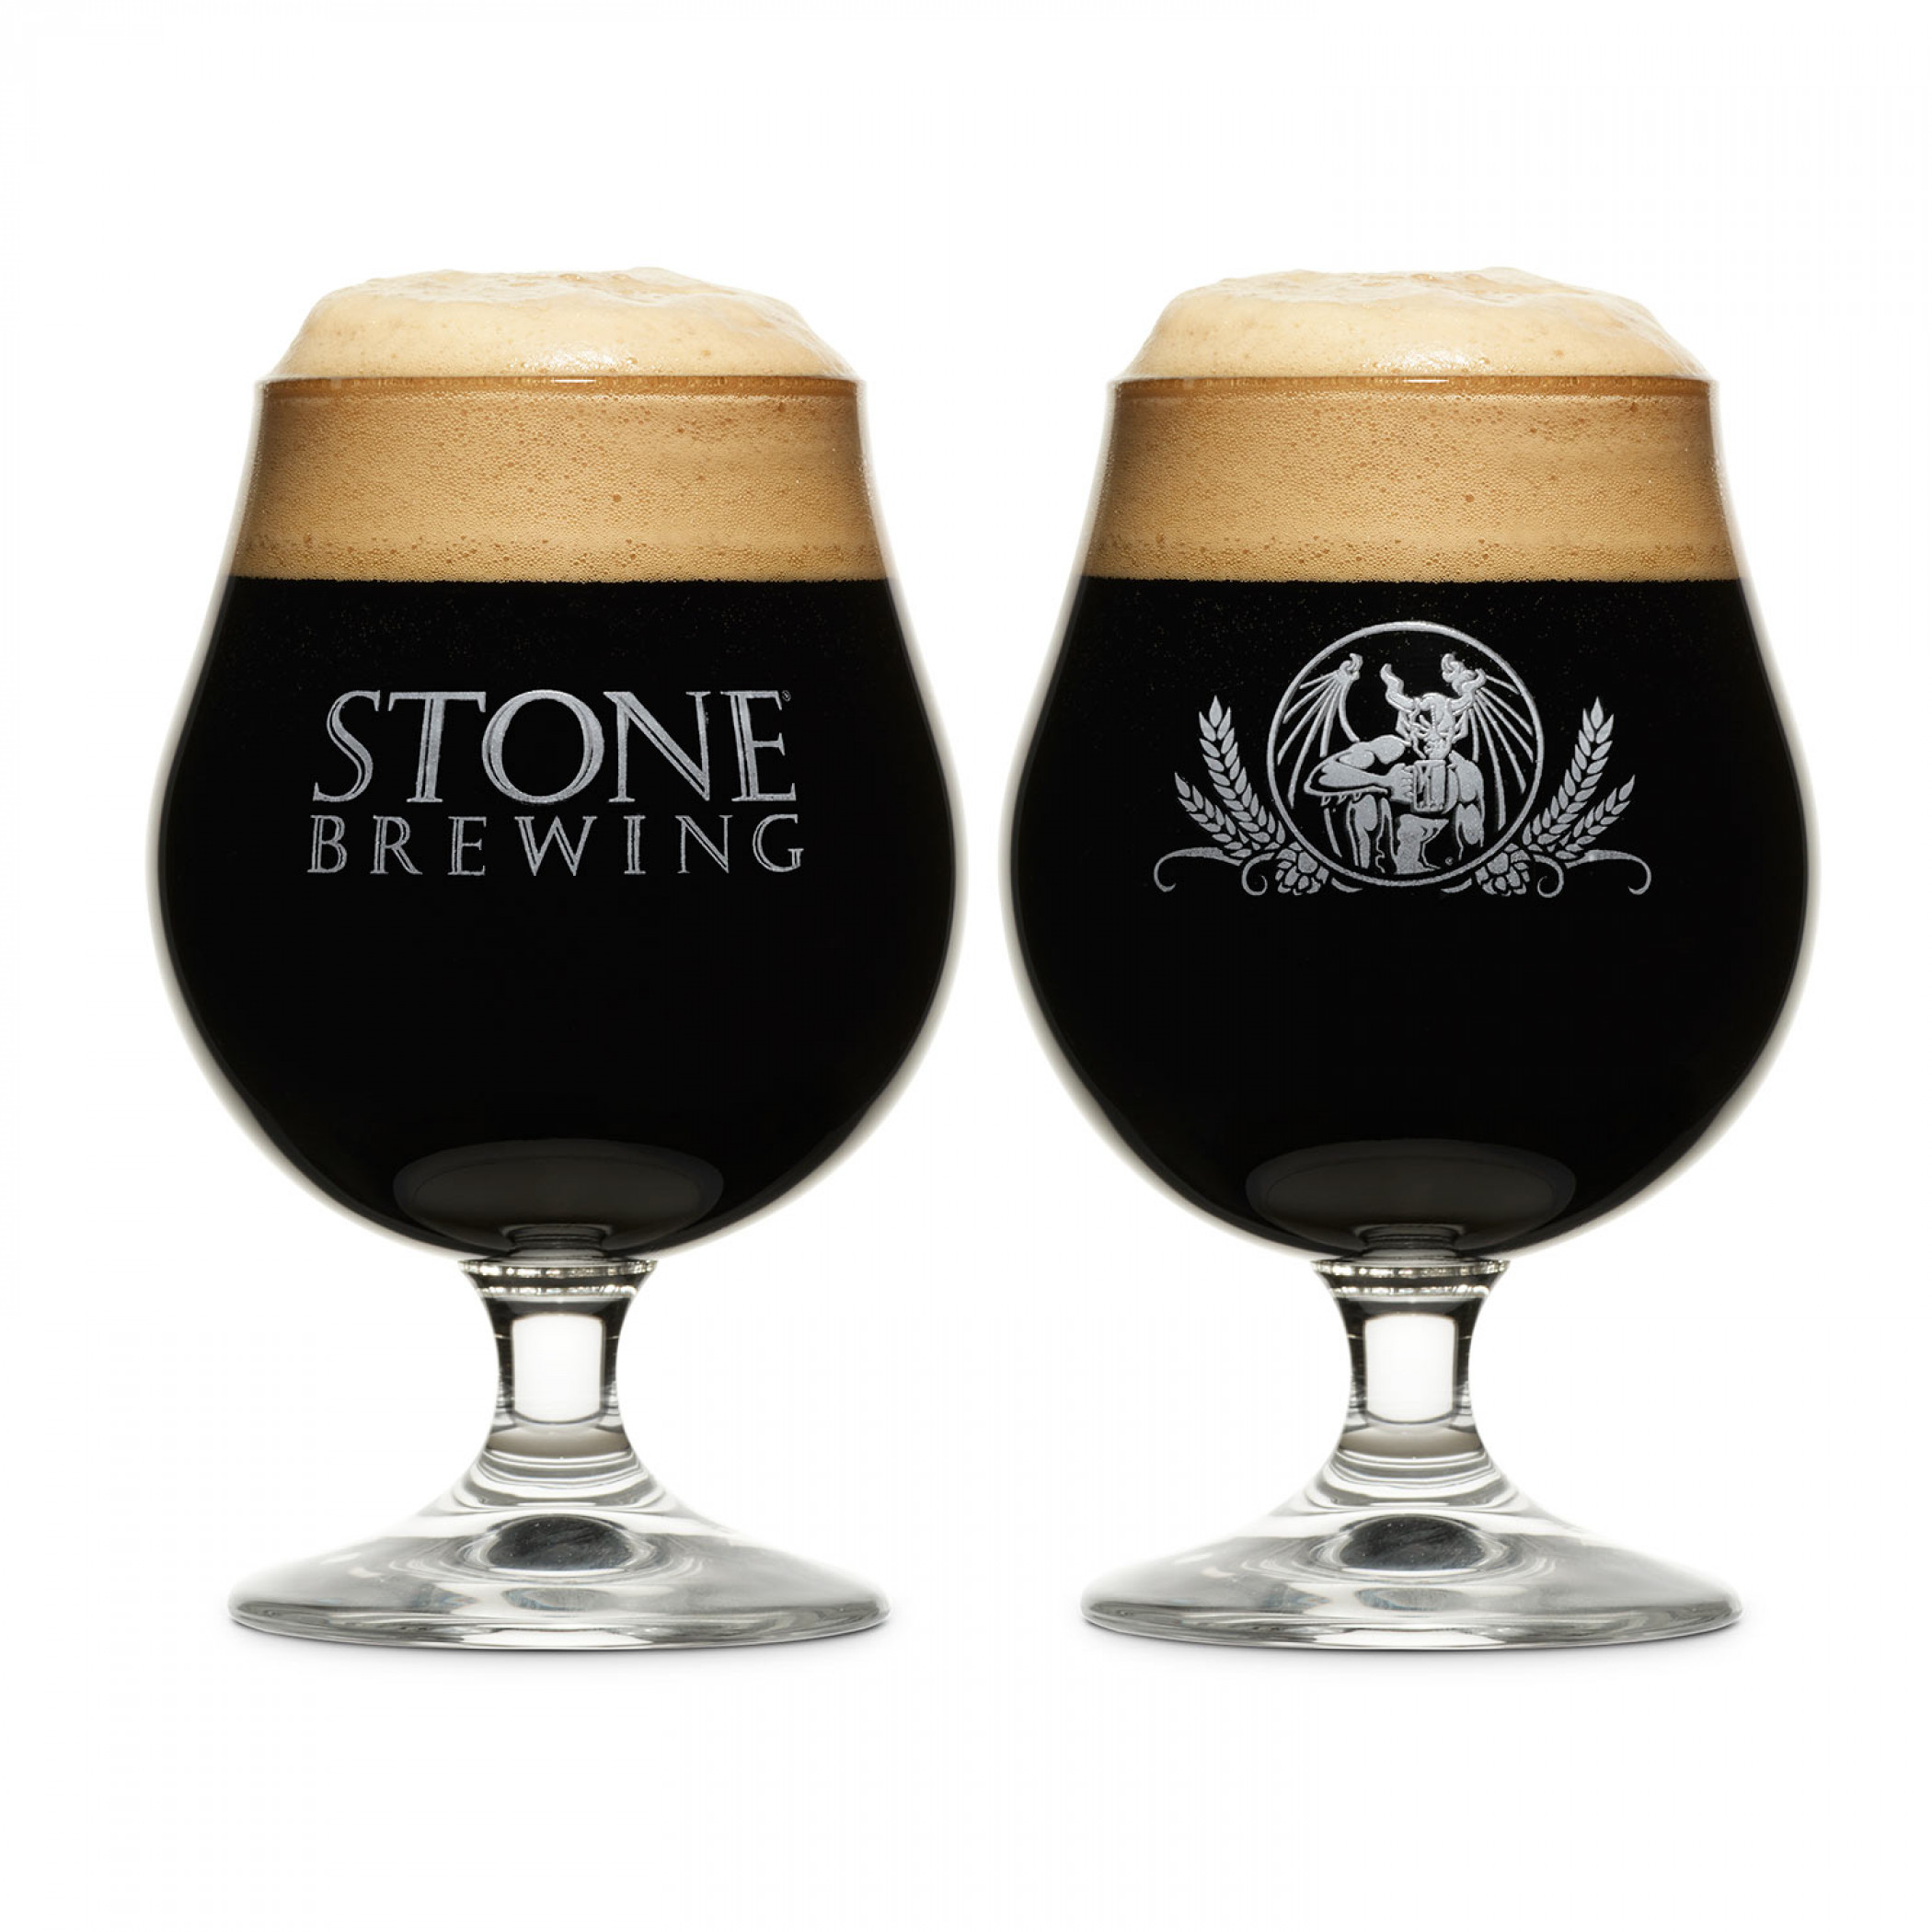 https://mmv2api.s3.us-east-2.amazonaws.com/products/images/Stone_Brewing_Specialty_Glasses1_LG.jpg